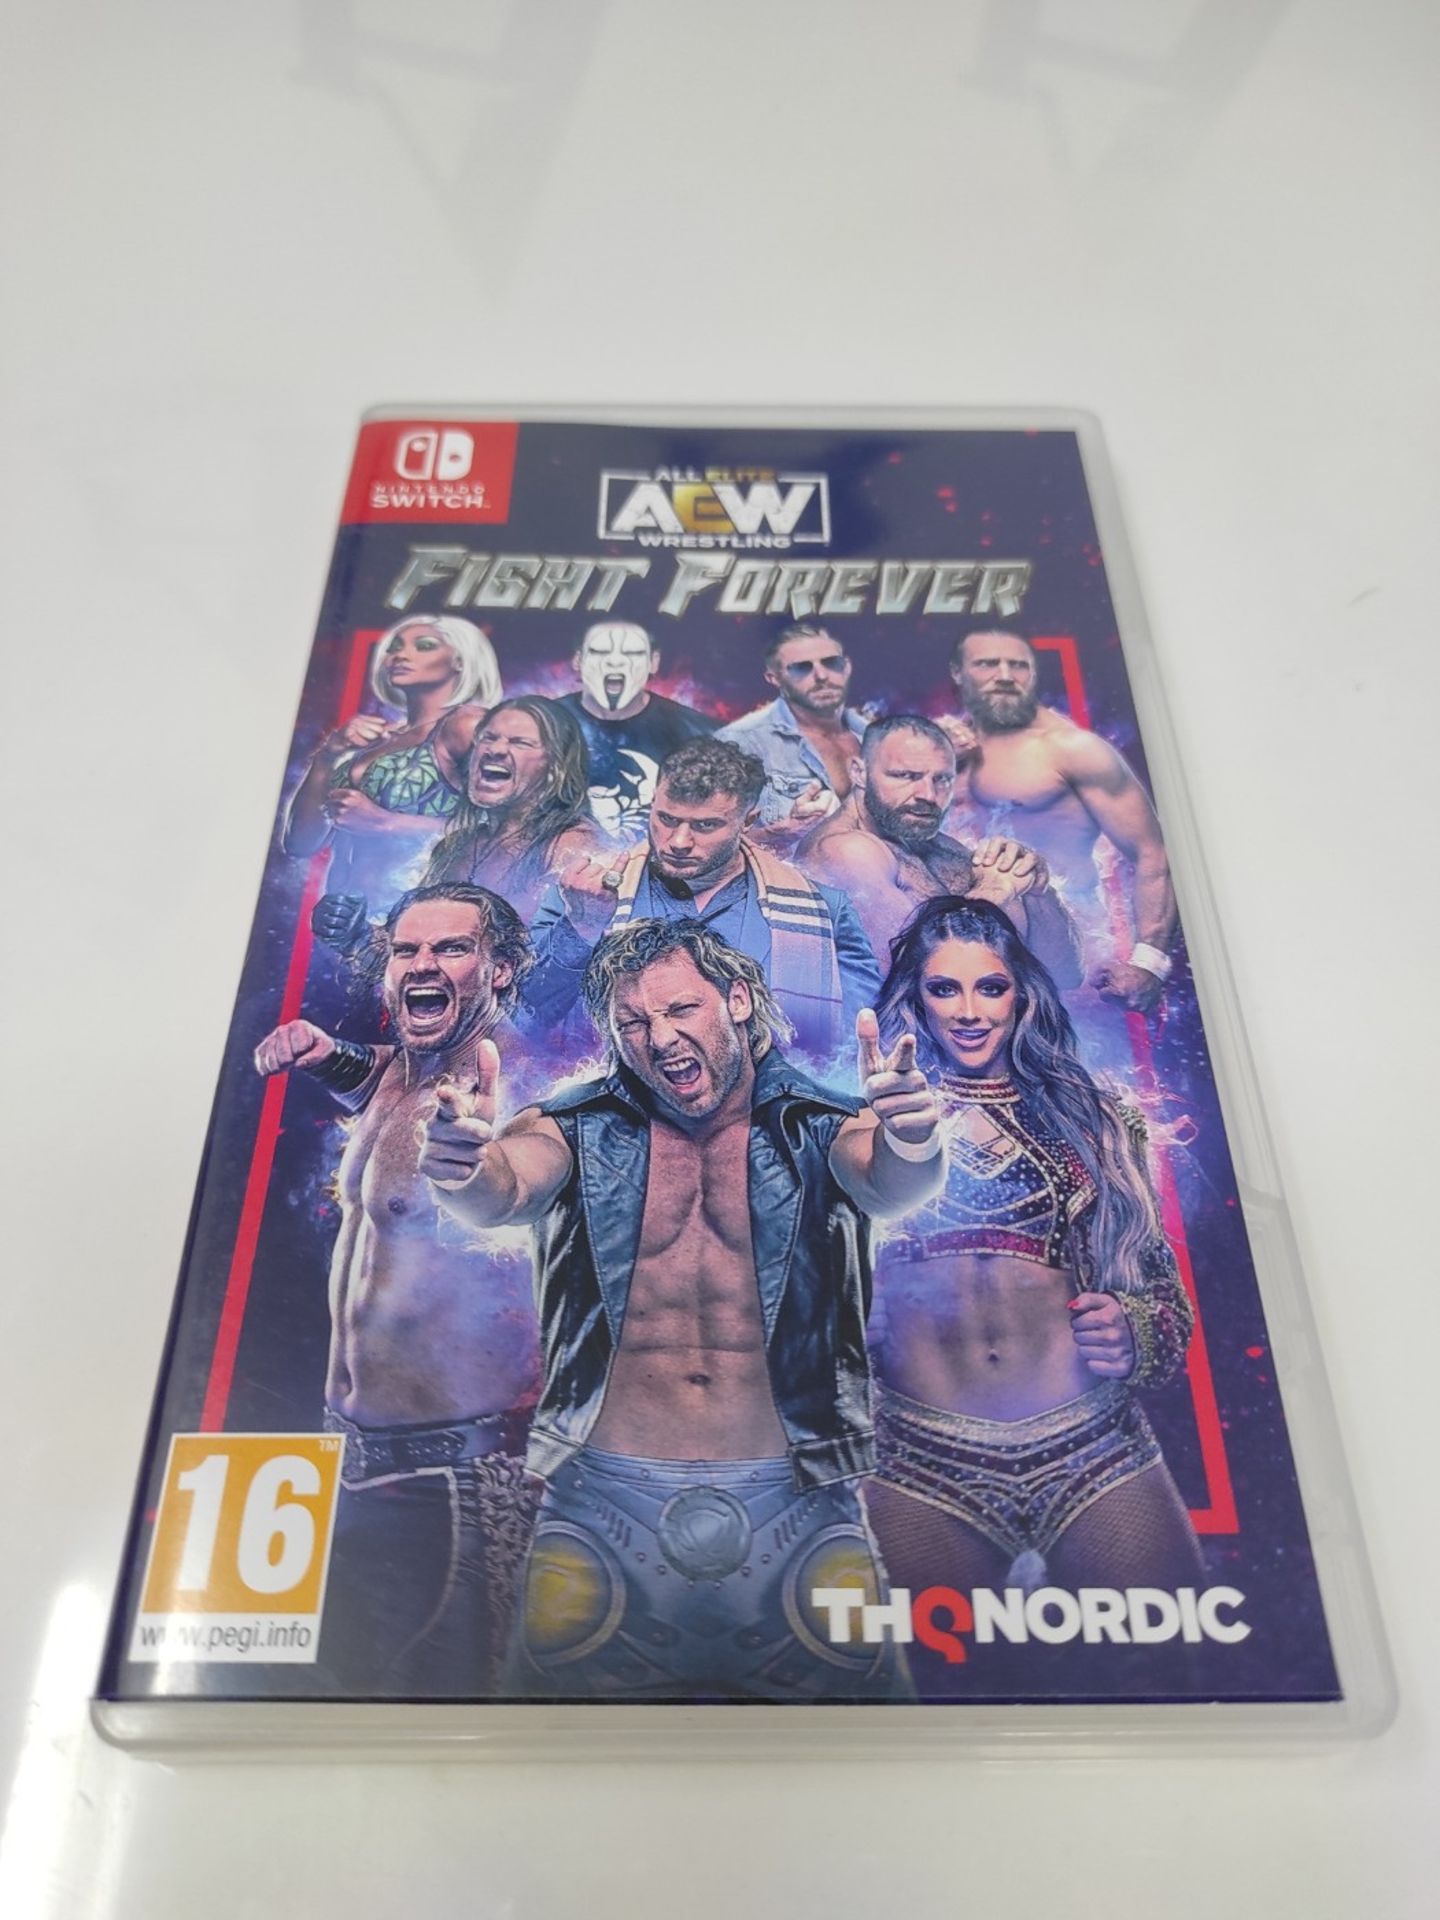 AEW: Fight Forever is a video game available on the Nintendo Switch platform. - Image 5 of 6